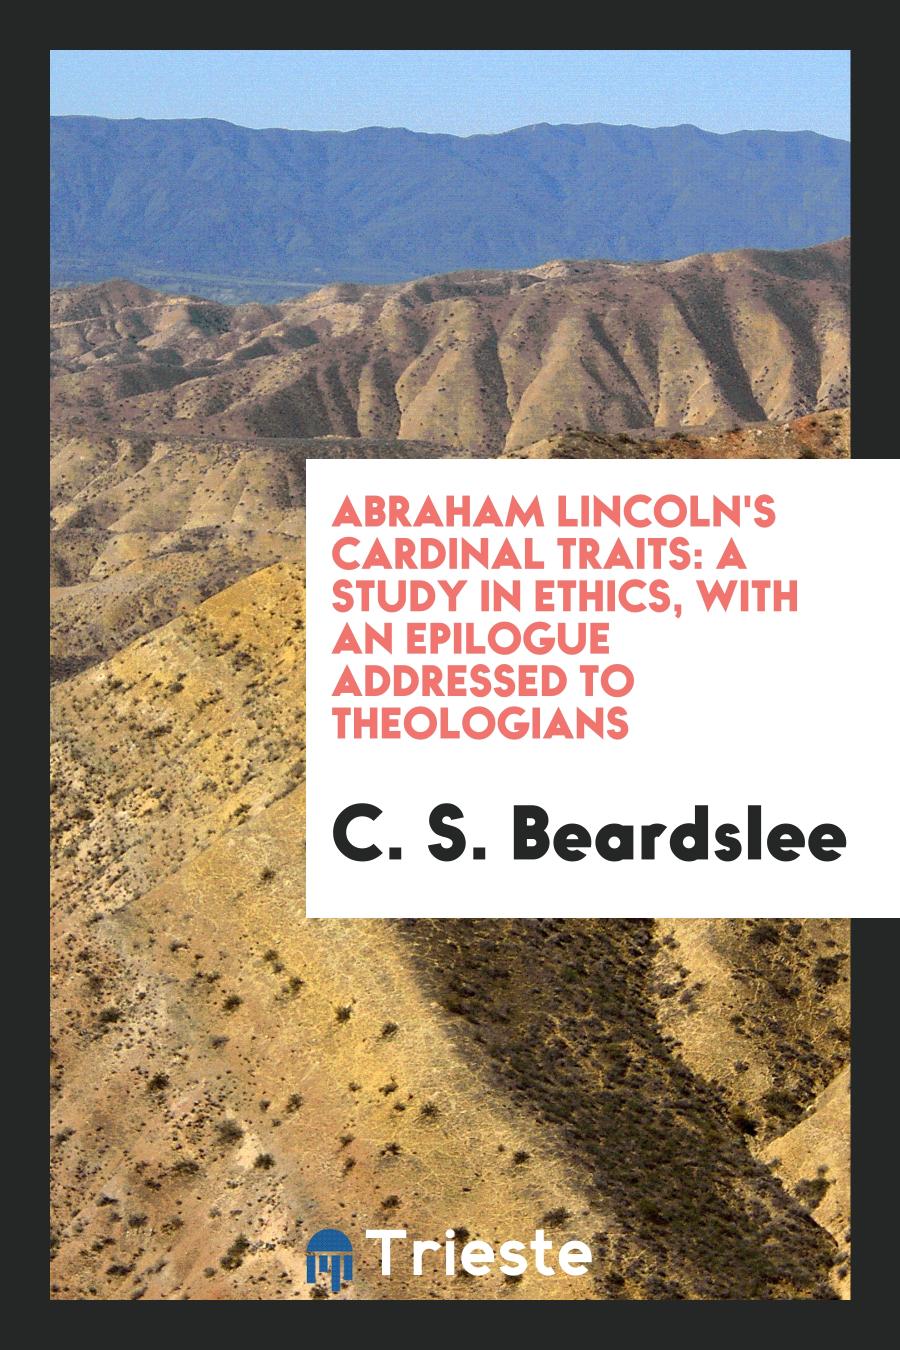 Abraham Lincoln's Cardinal Traits: A Study in Ethics, with an Epilogue Addressed to Theologians